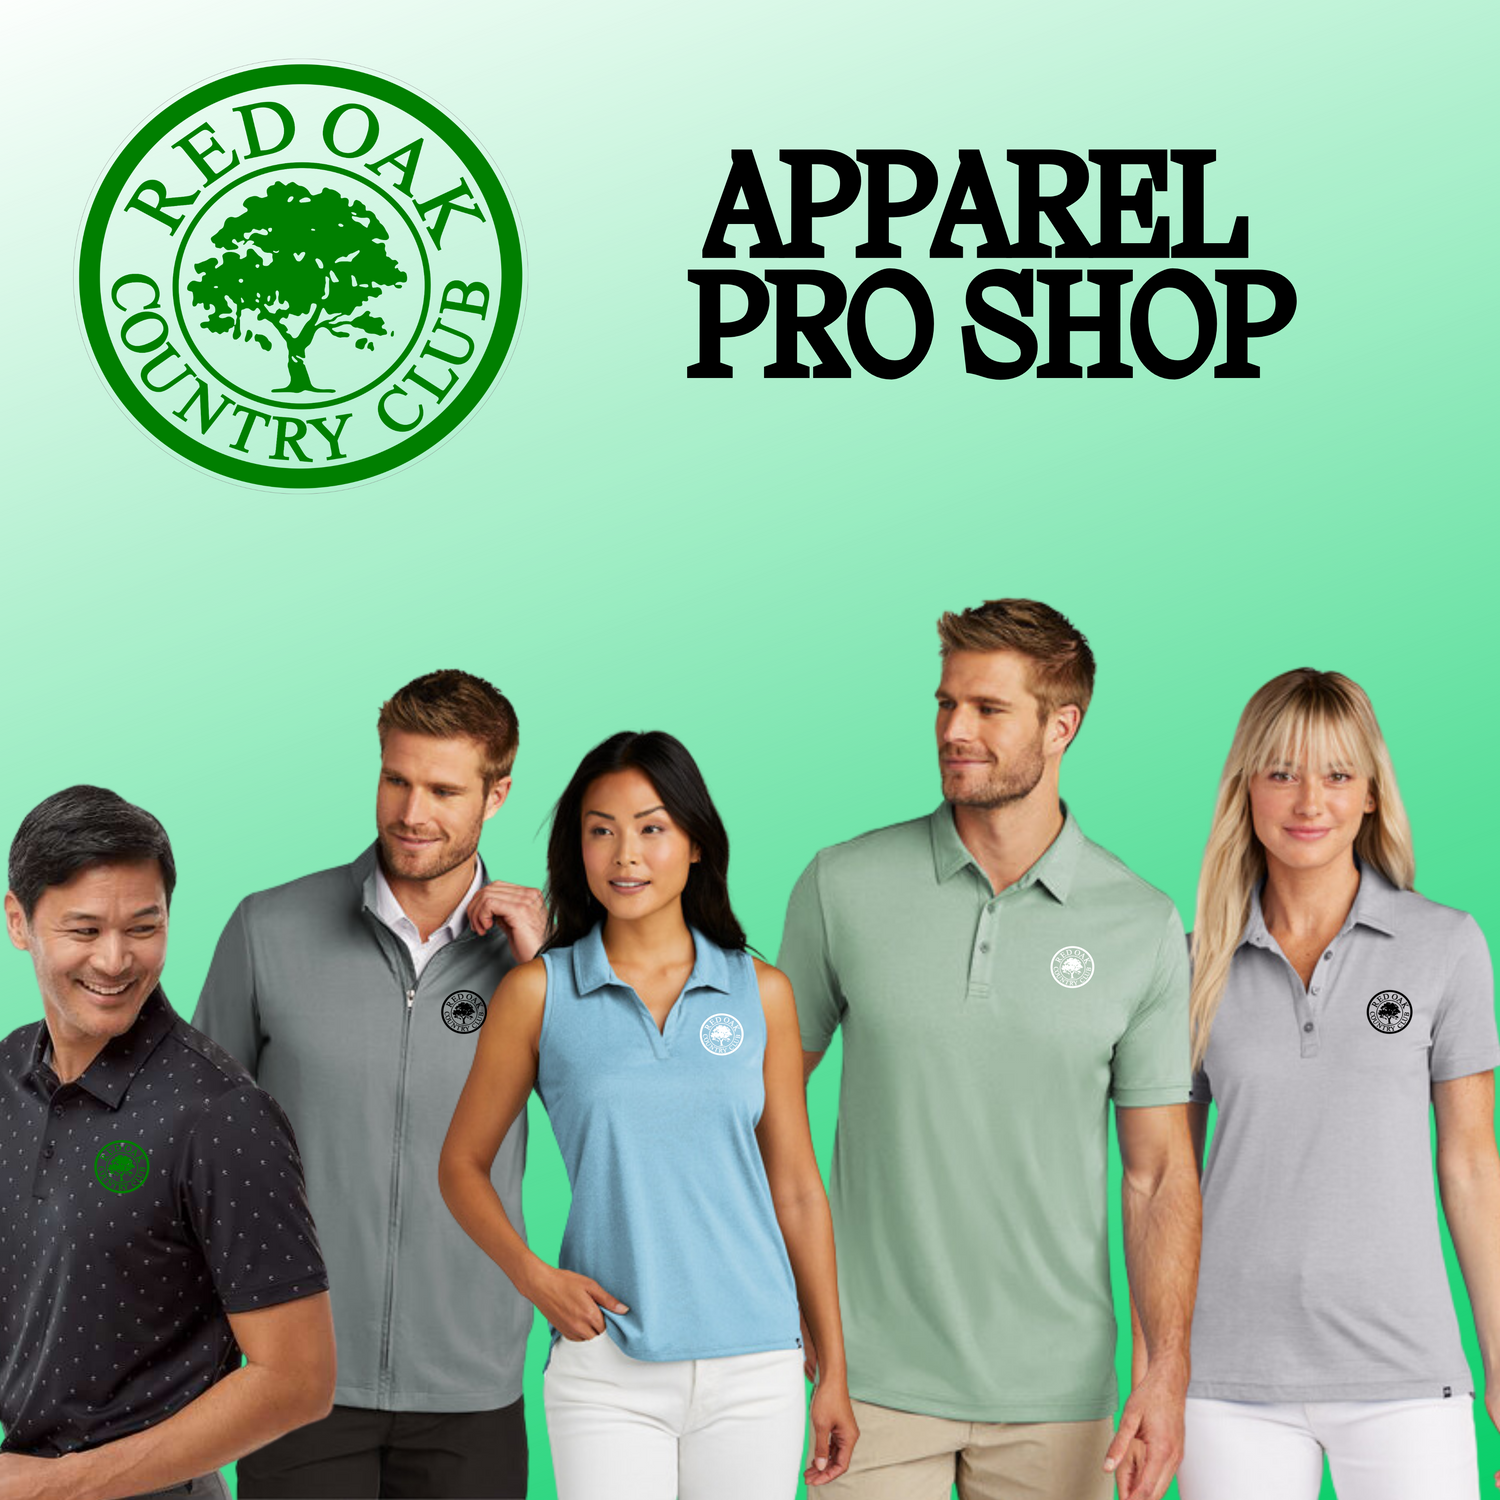 Red Oak Country Club Online Pro Shop